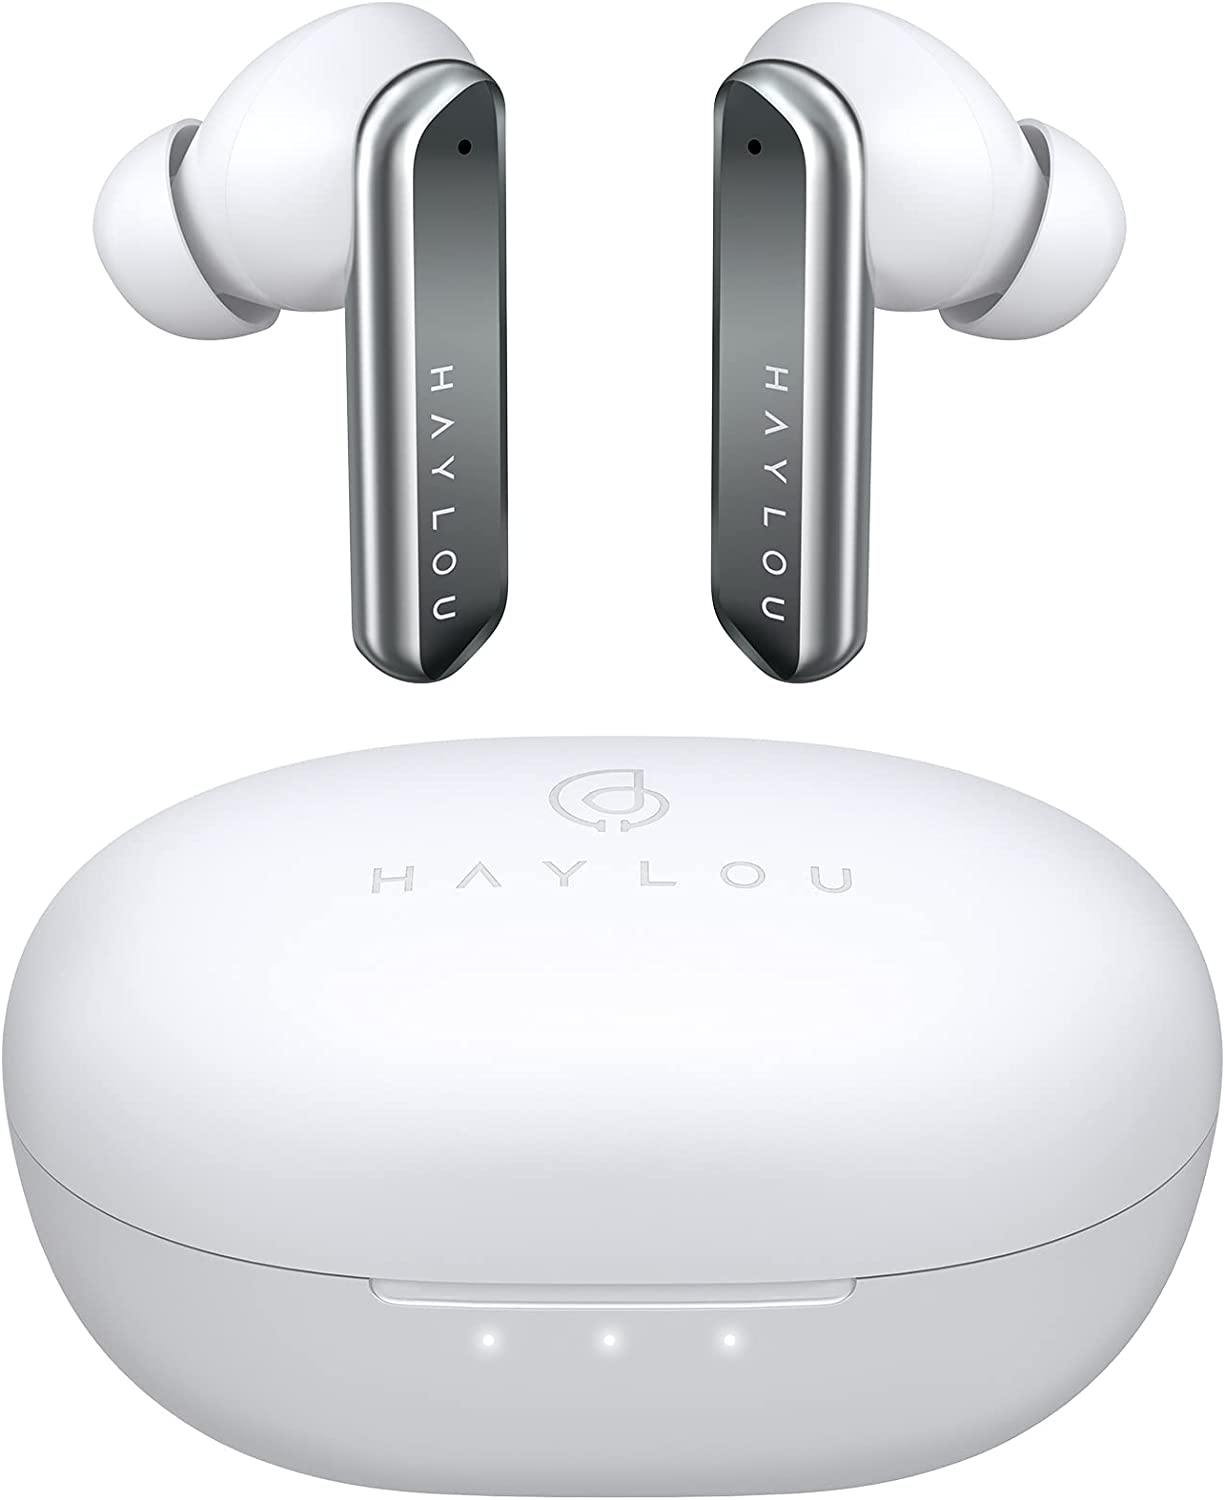 Haylou W1 Bluetooth 5.2 Wireless Earbuds in-Ear Headphones-AAC HD Stereo Sound with 4 Mic, AptX, ENC, Knowles Moving Iron Noise Cancelling, 24H Playtime, Waterproof Wireless Earphones, White